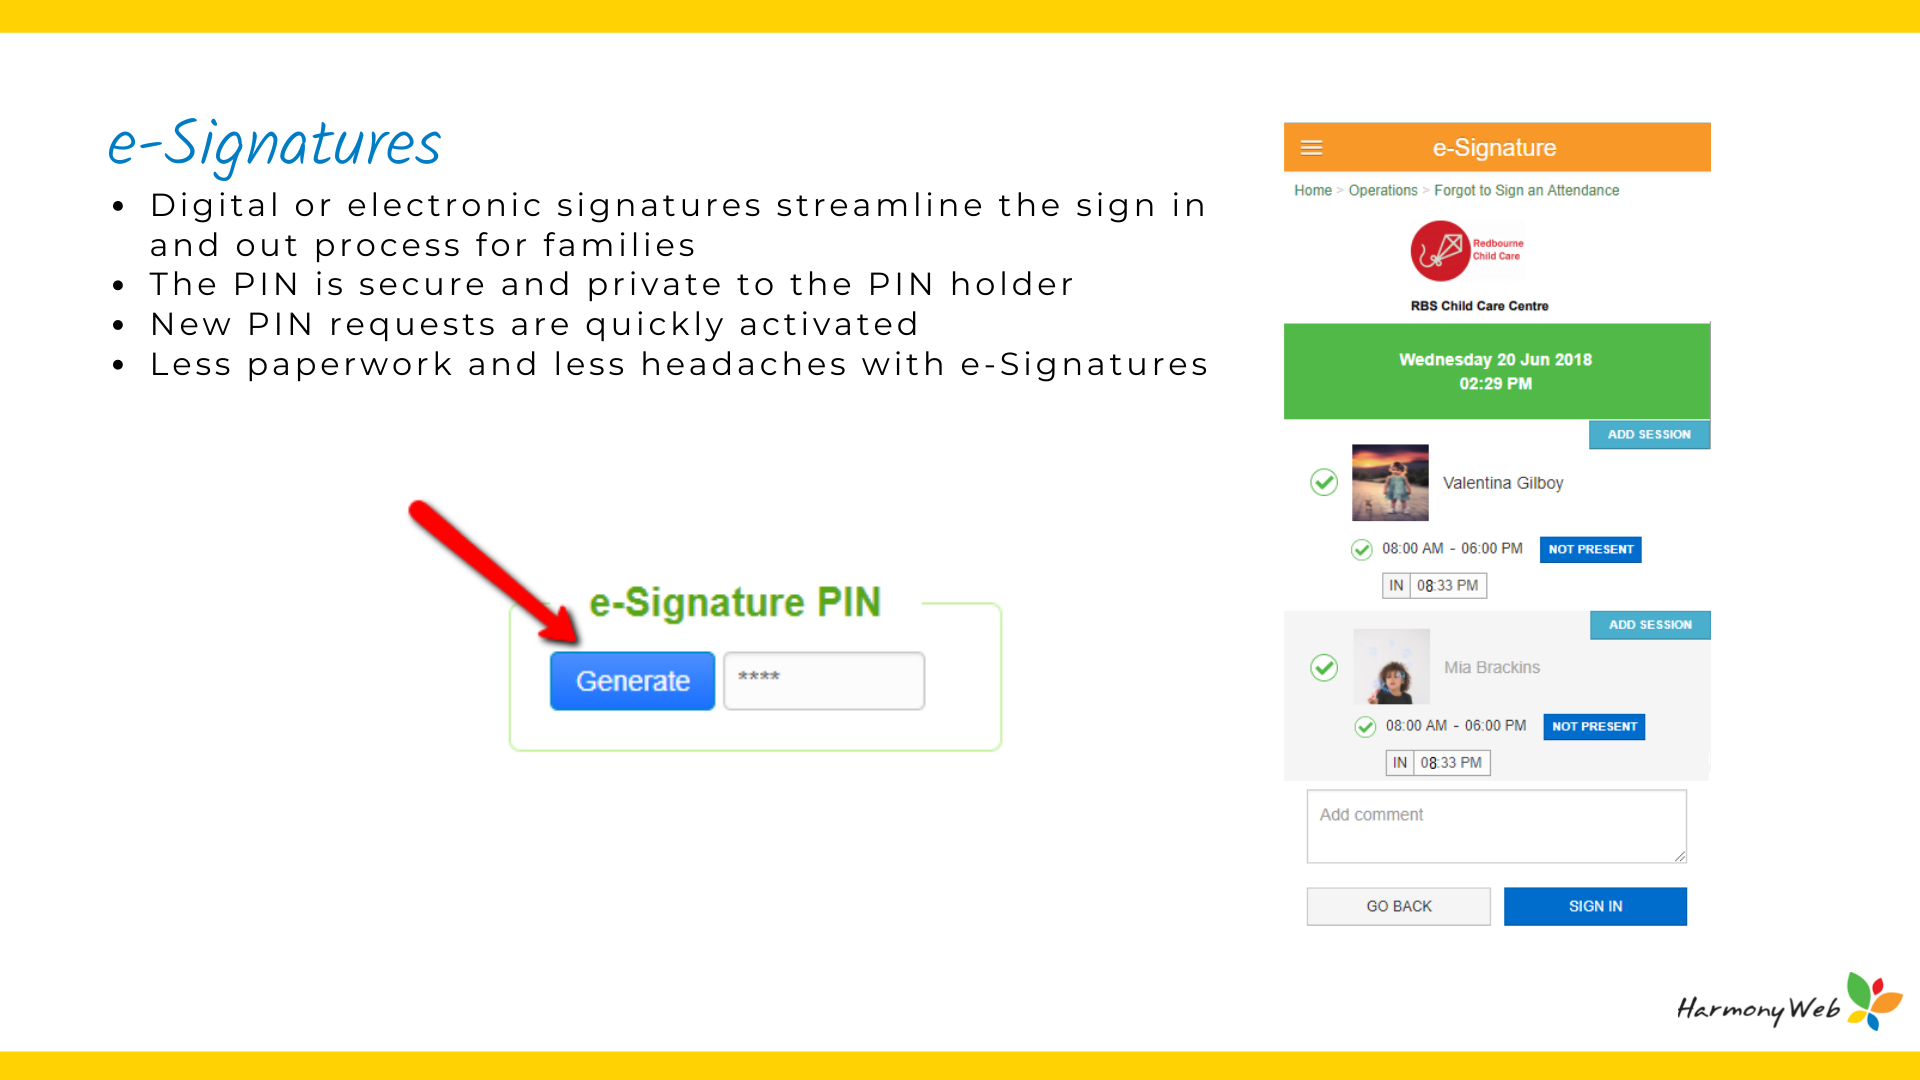 e-Signatures to sign in and out